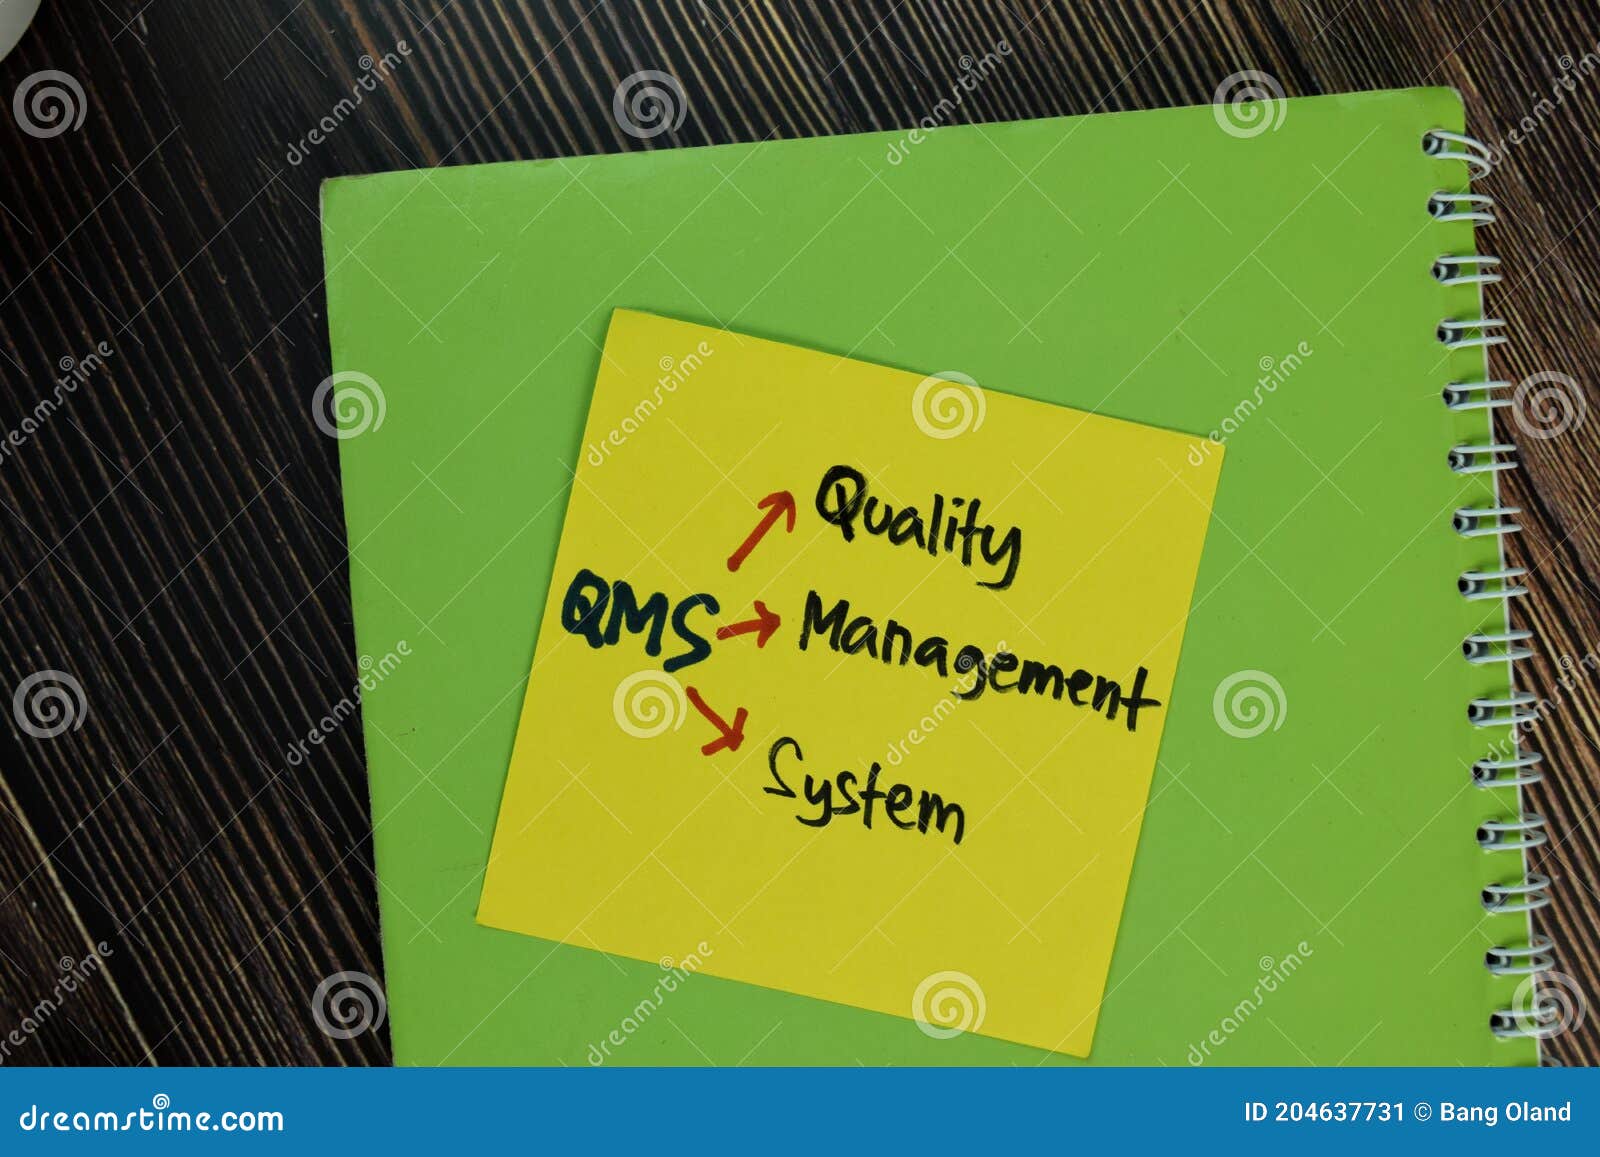 qms - quality management system write on sticky notes  on wooden table